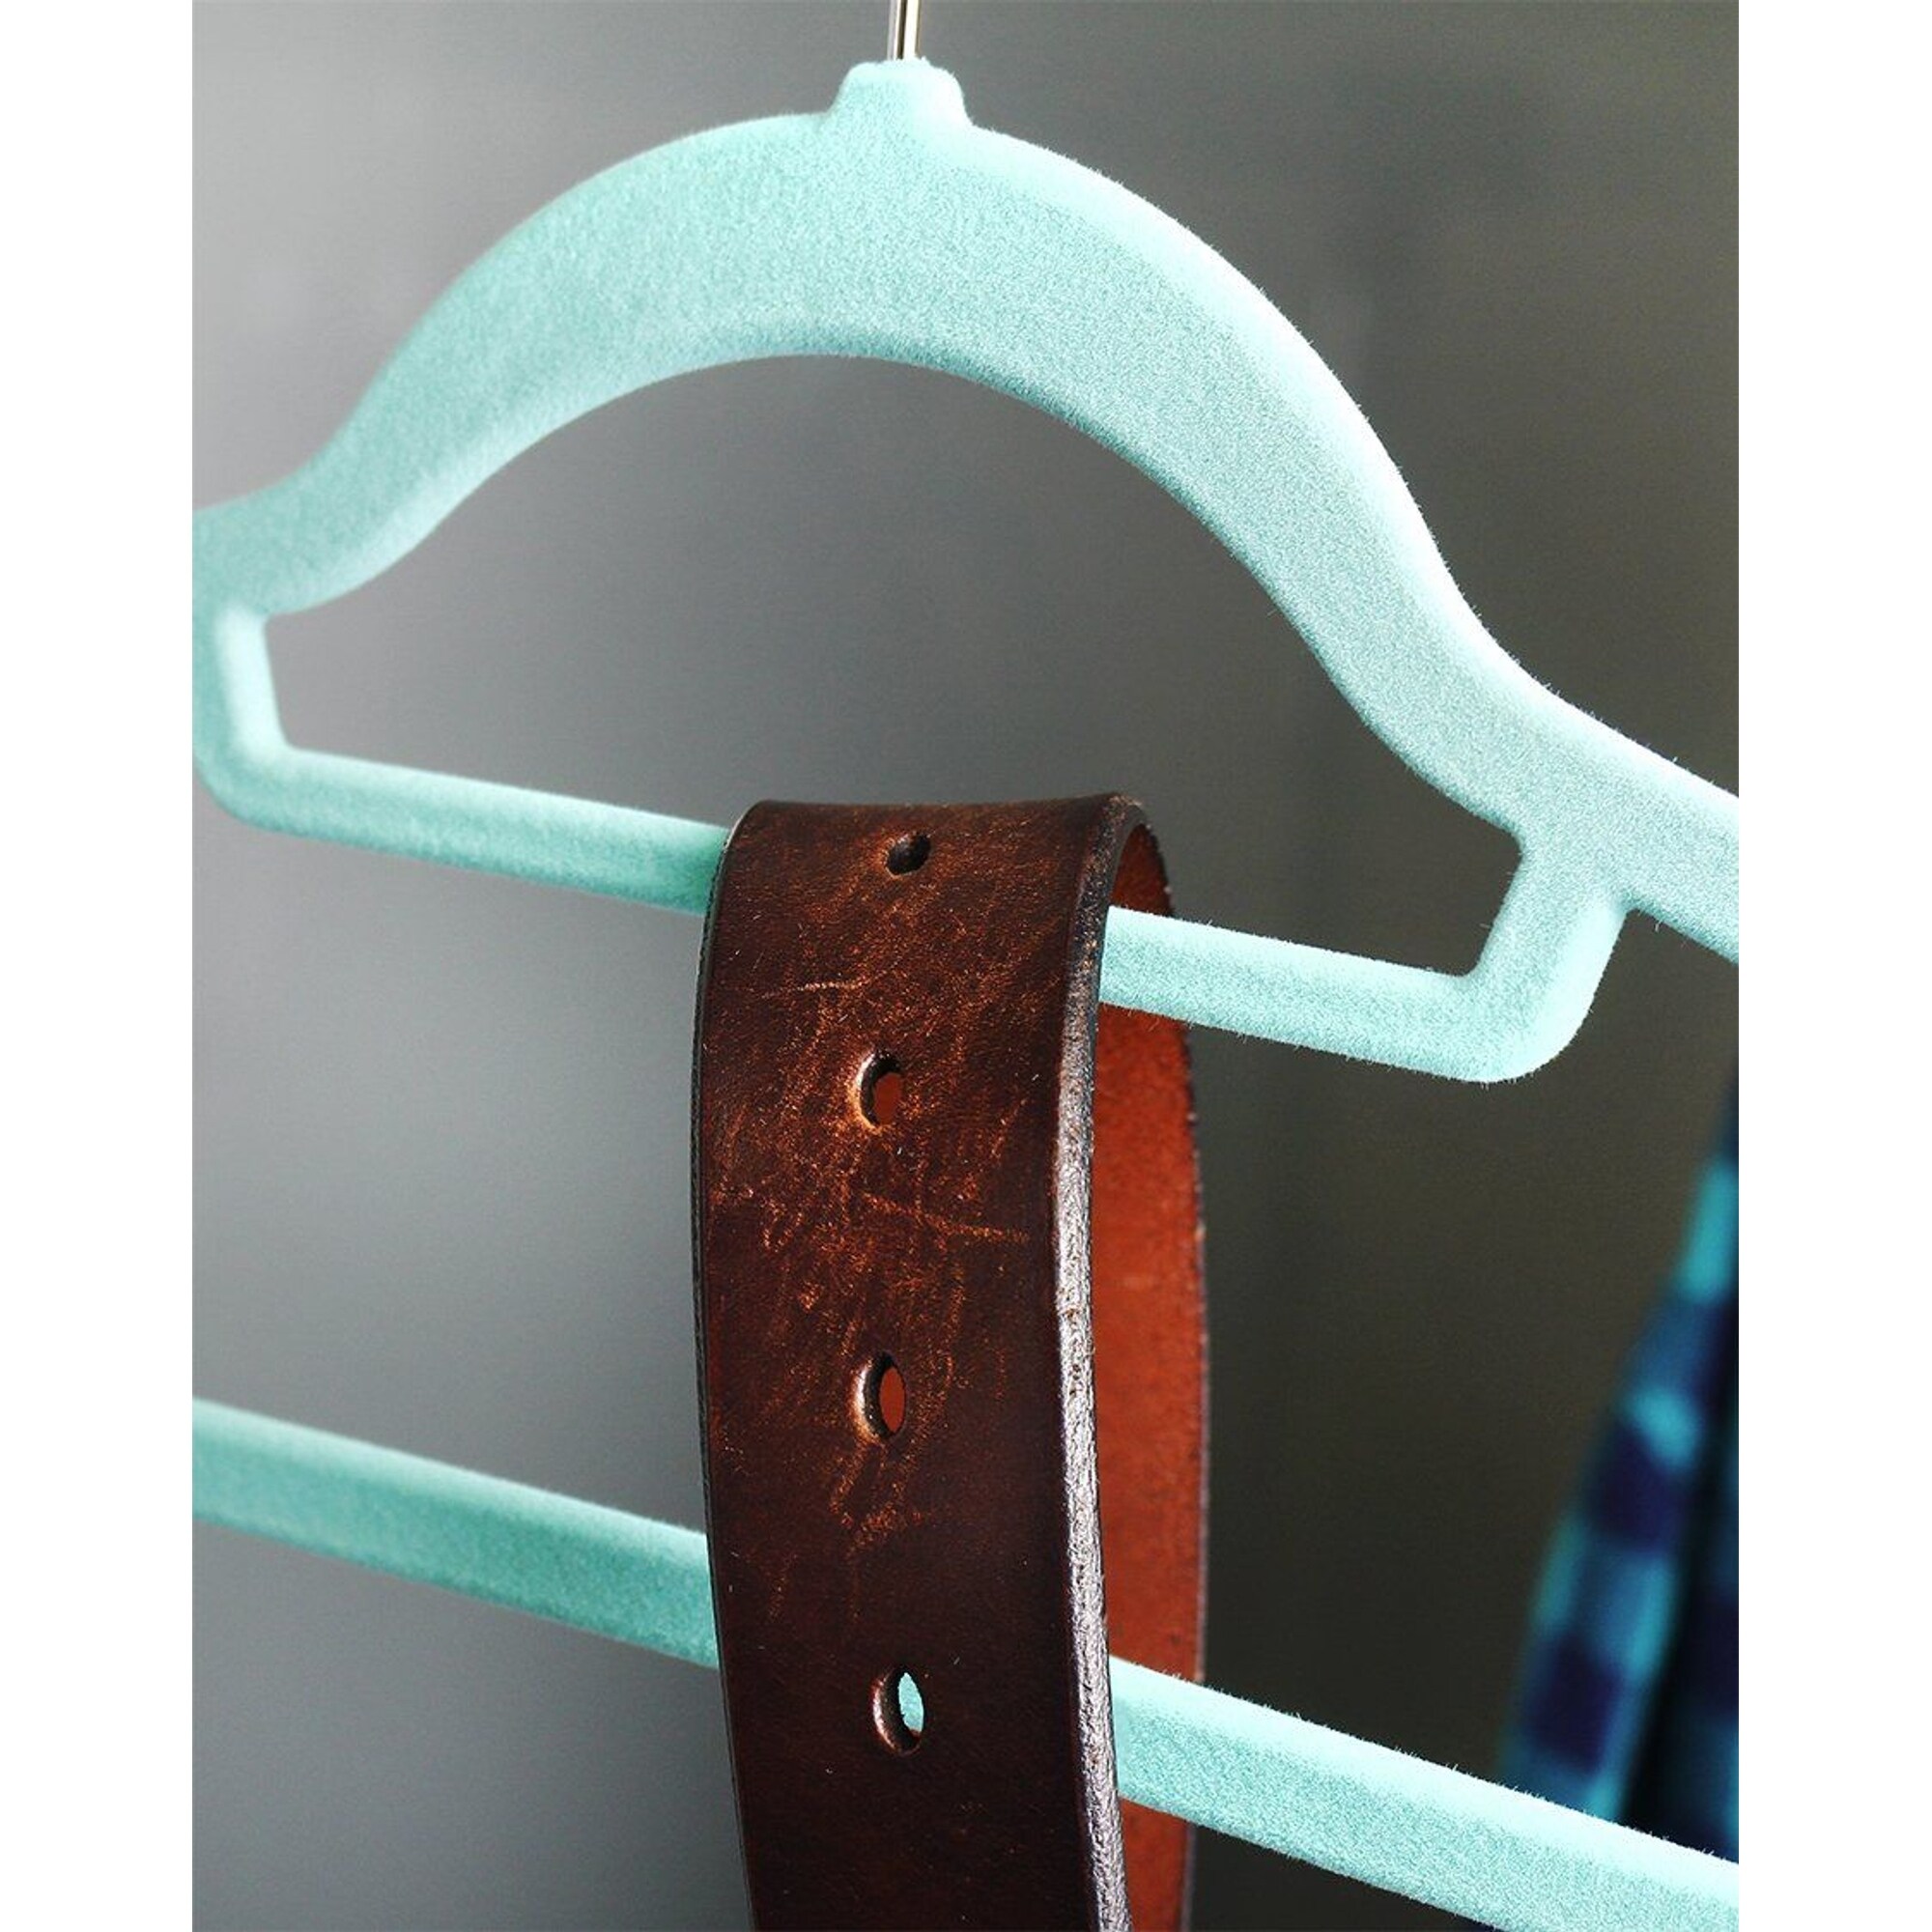 https://ak1.ostkcdn.com/images/products/is/images/direct/b523c65d83afe81dd72d381687080df5a427c4a0/50-Pack-Nonslip-Velvet-Hangers-with-Cascading-Hooks-for-Shirts%2C-Suits-and-Dresses-%28Teal%2C-18-In%29.jpg